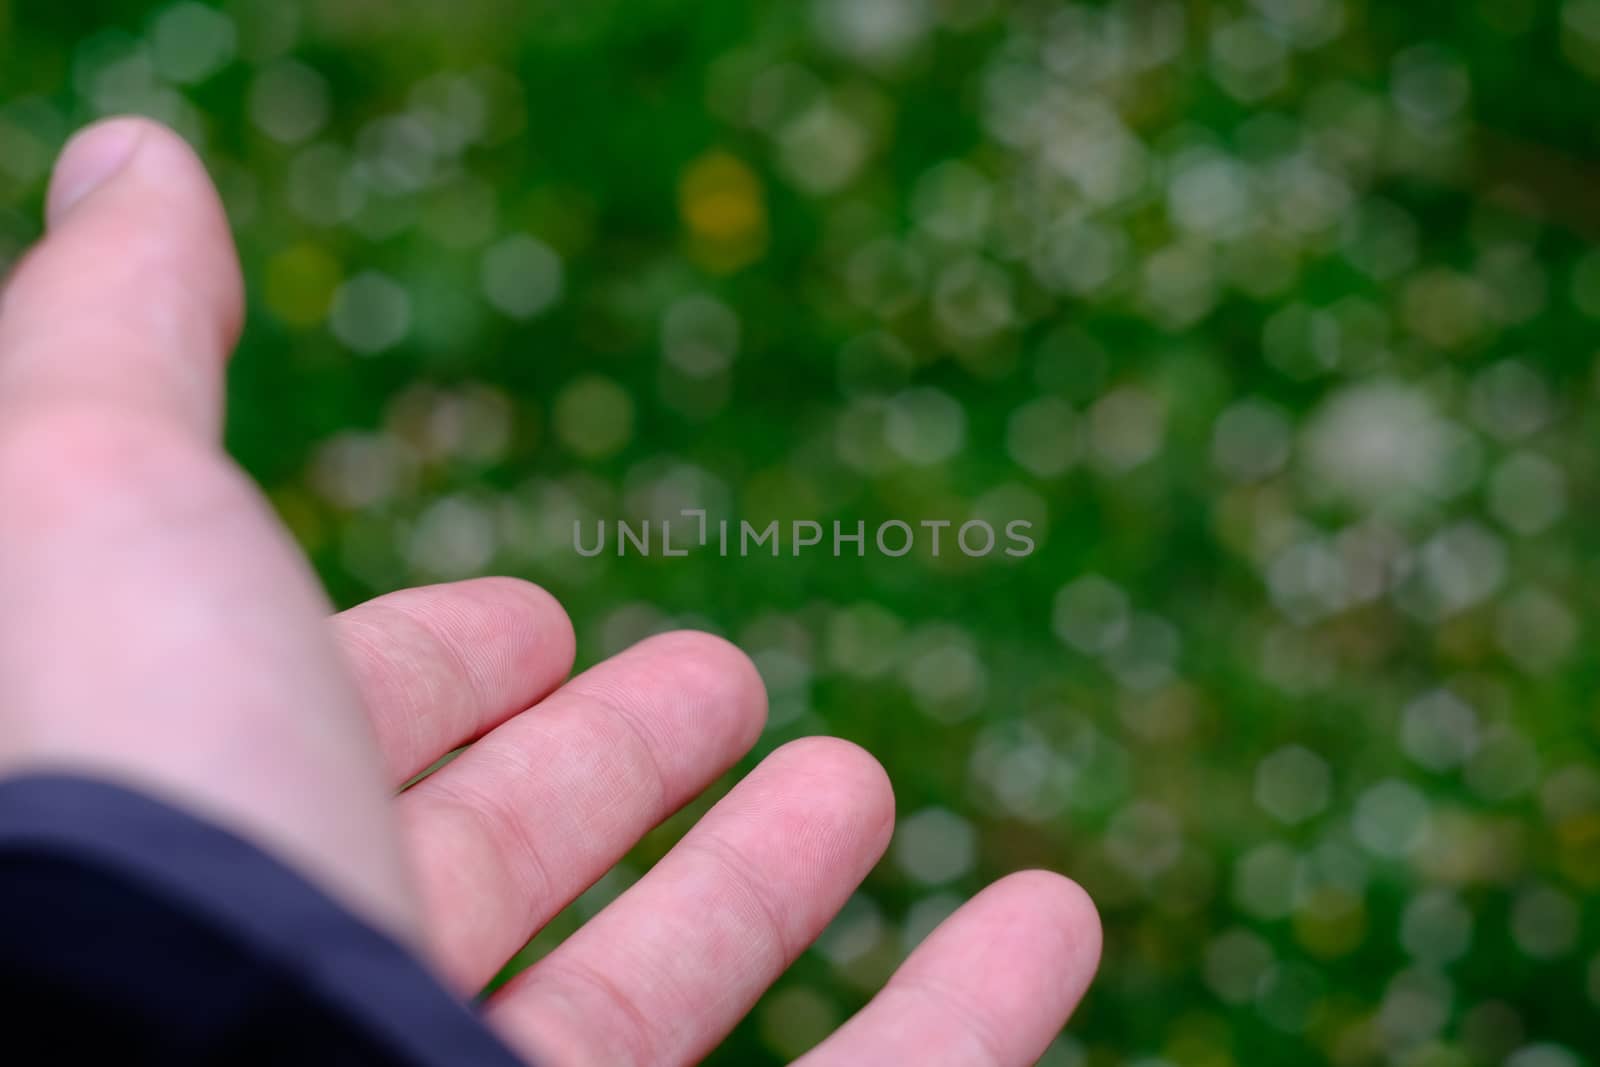 Several blurred white and yellow flowers over green grass field serves as a perfect blurred background signaled by a mans hand